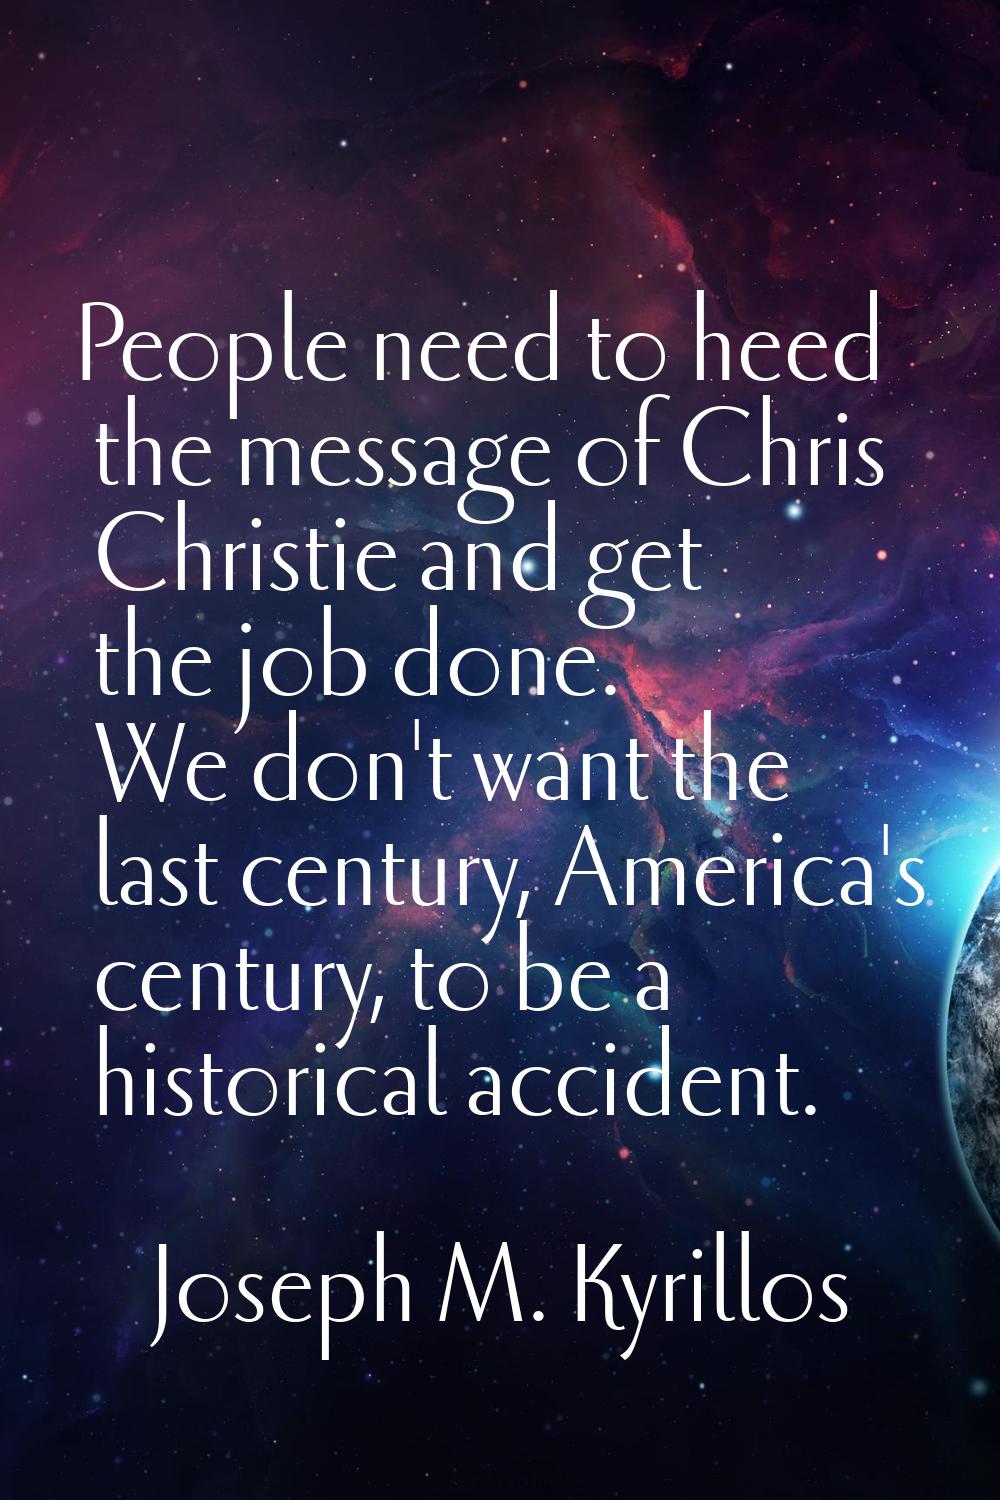 People need to heed the message of Chris Christie and get the job done. We don't want the last cent